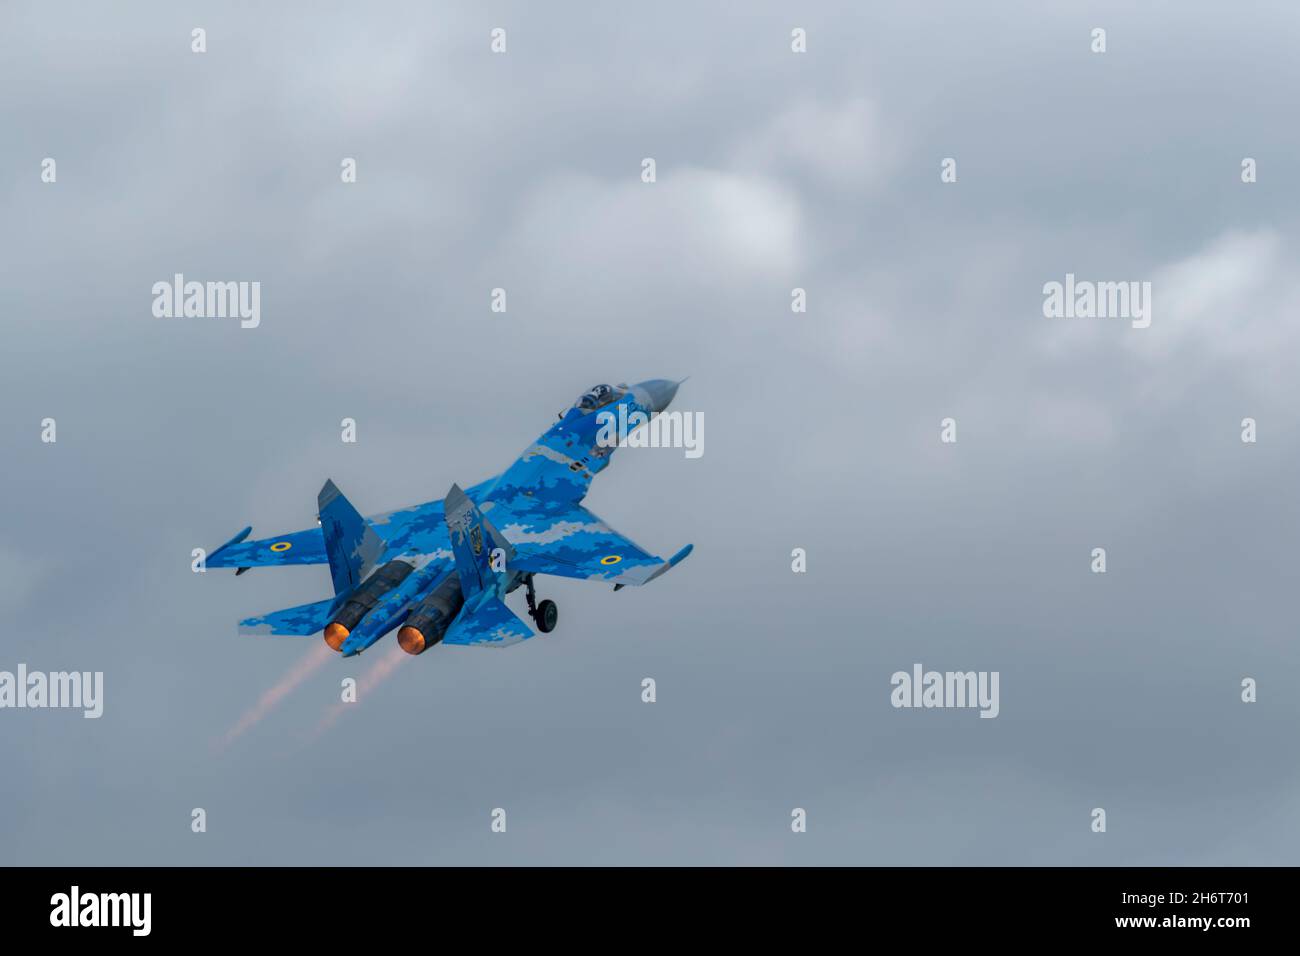 Ukraine Air Force Sukhoi SU-27 Fighter Plane with After Burners Stock Photo